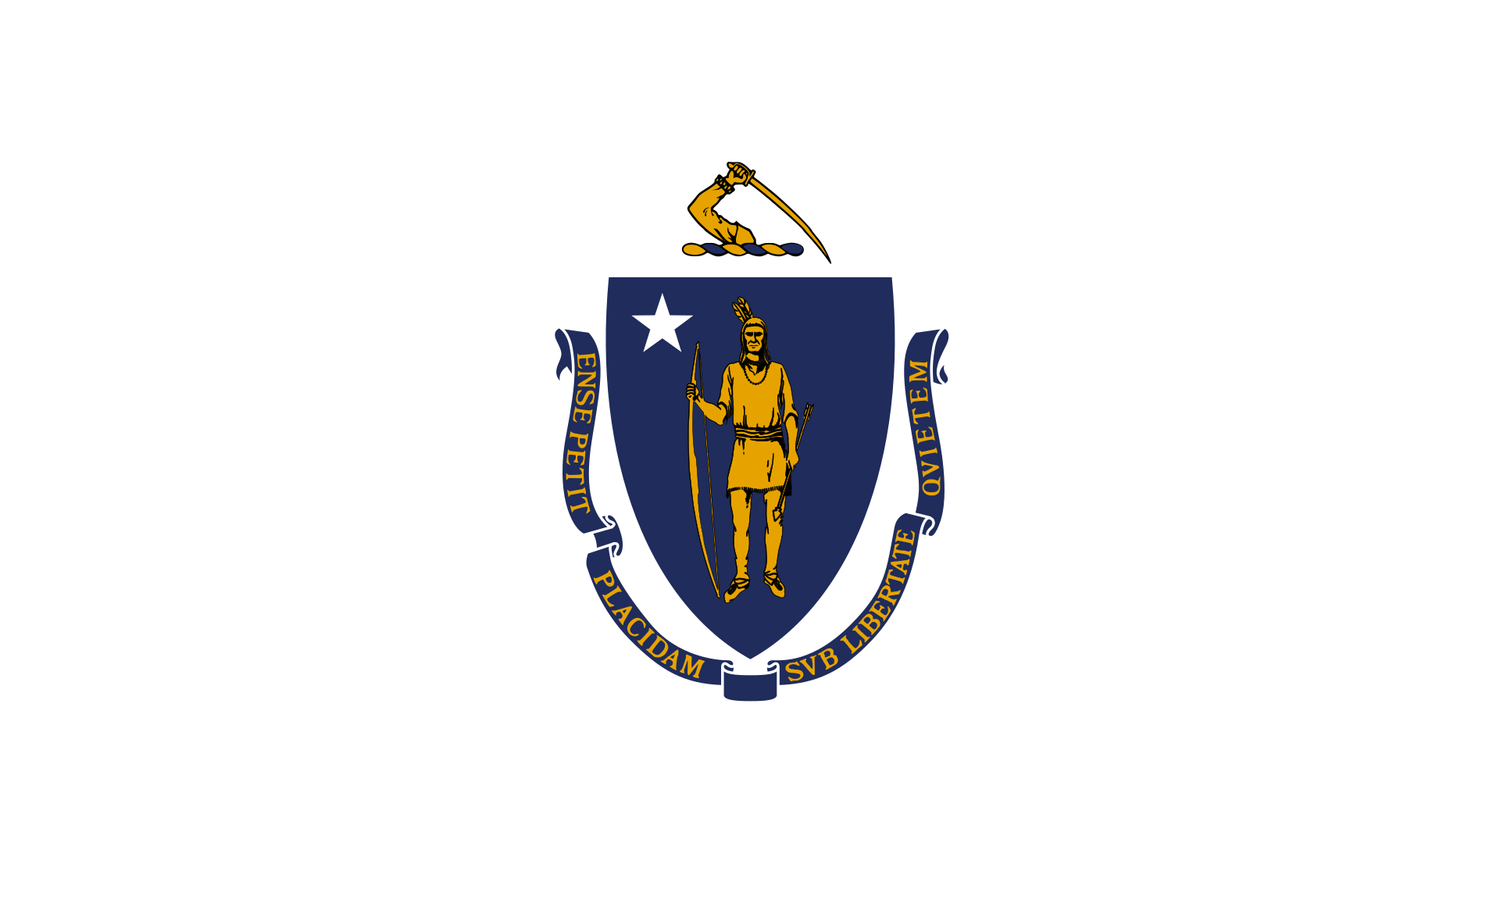 The official state flag of Massachusetts was adopted in 1971 and features the state coat of arms on a white field. - History By Mail